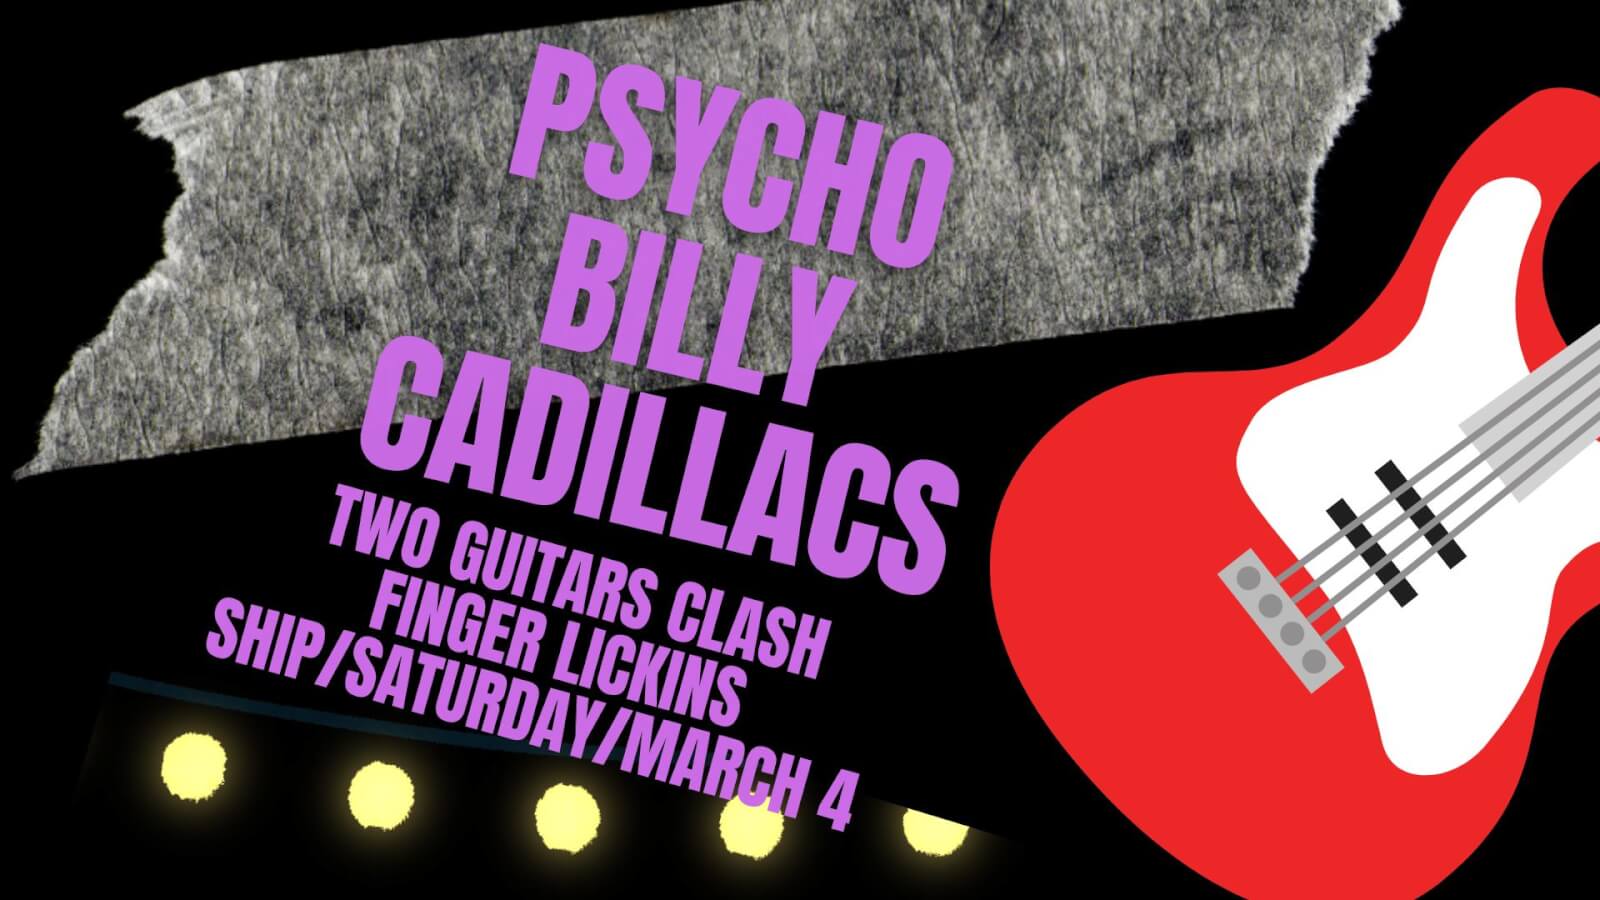 Psychobilly Cadillacs, Two Guitars Clash and the Finger Licks